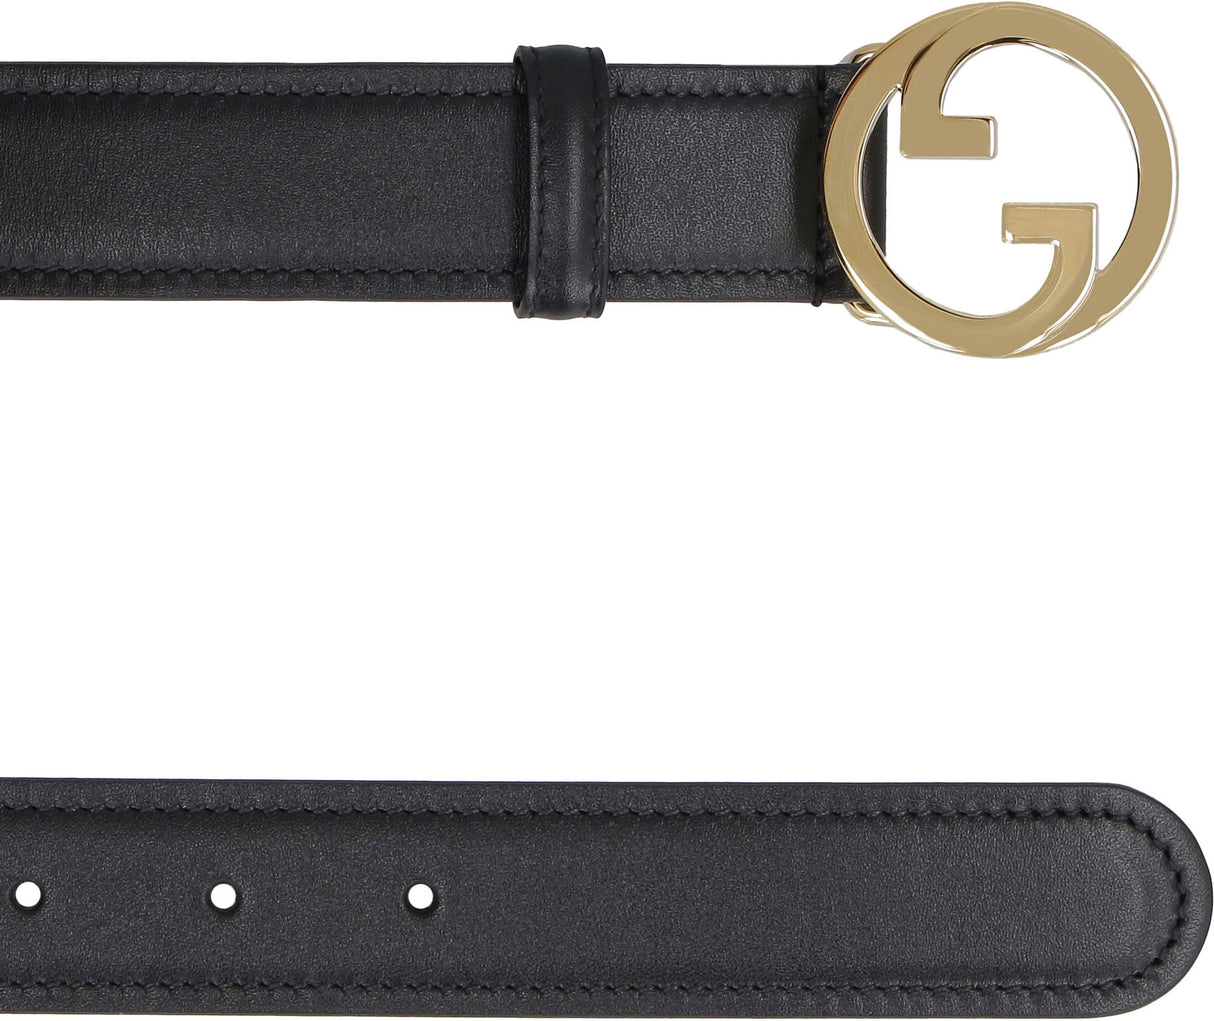 Luxurious Leather Belt for Ladies - Chic & Versatile Accessory for All Seasons